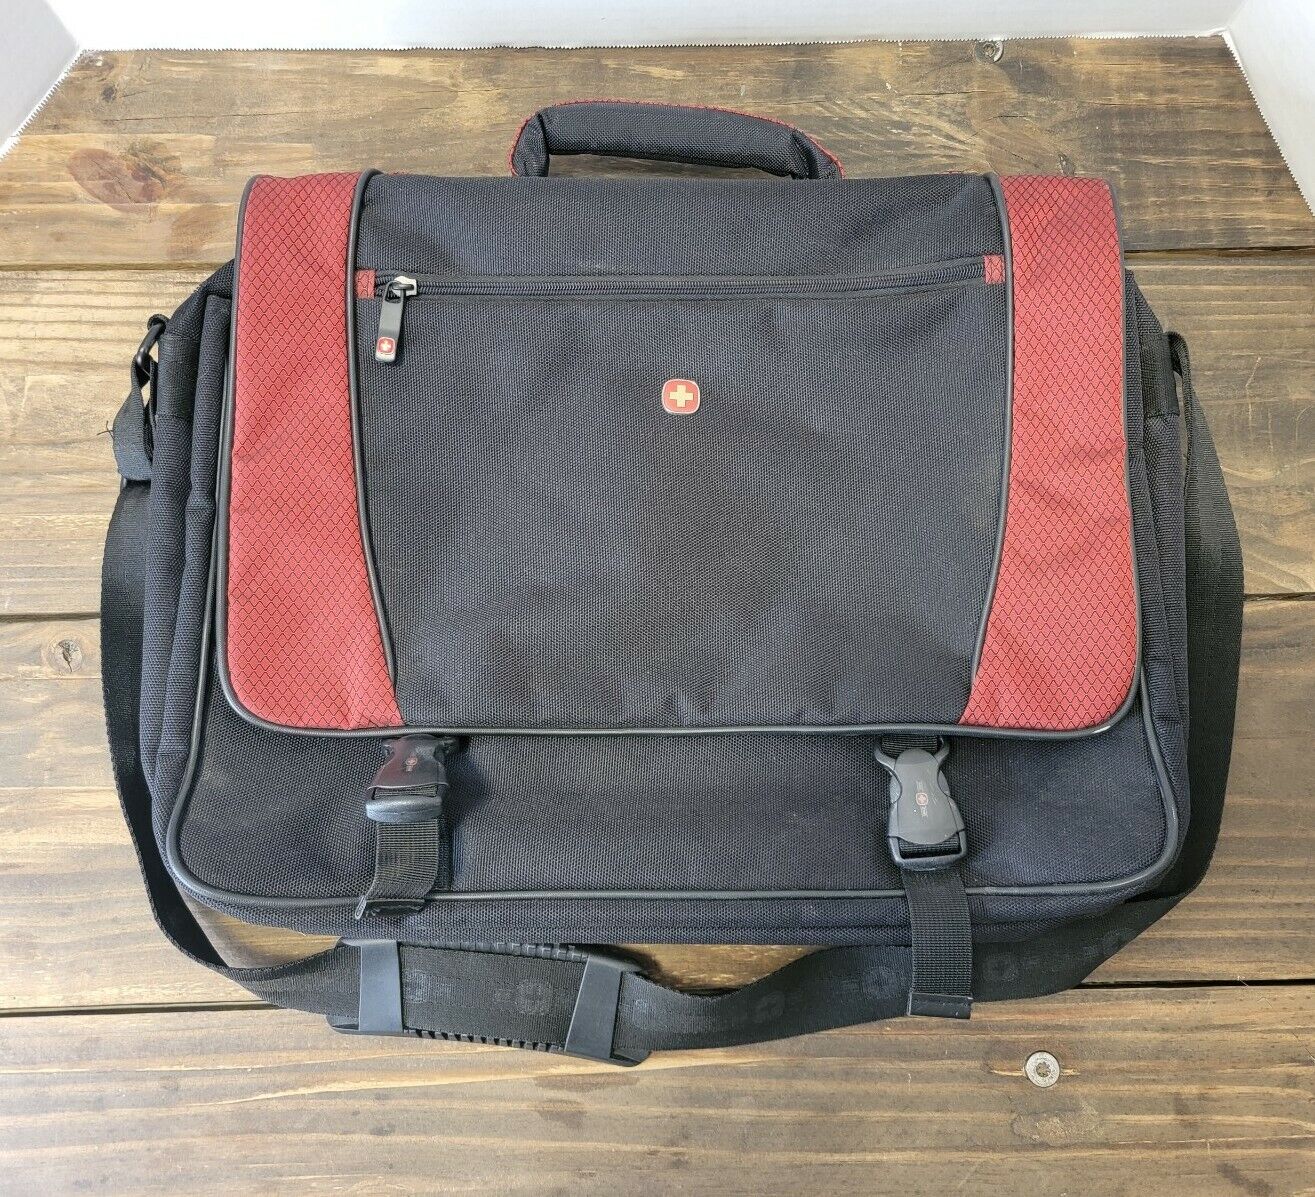 Swiss Army Red Black Laptop Gear Briefcase Case Carrying Messenger Bag Travel